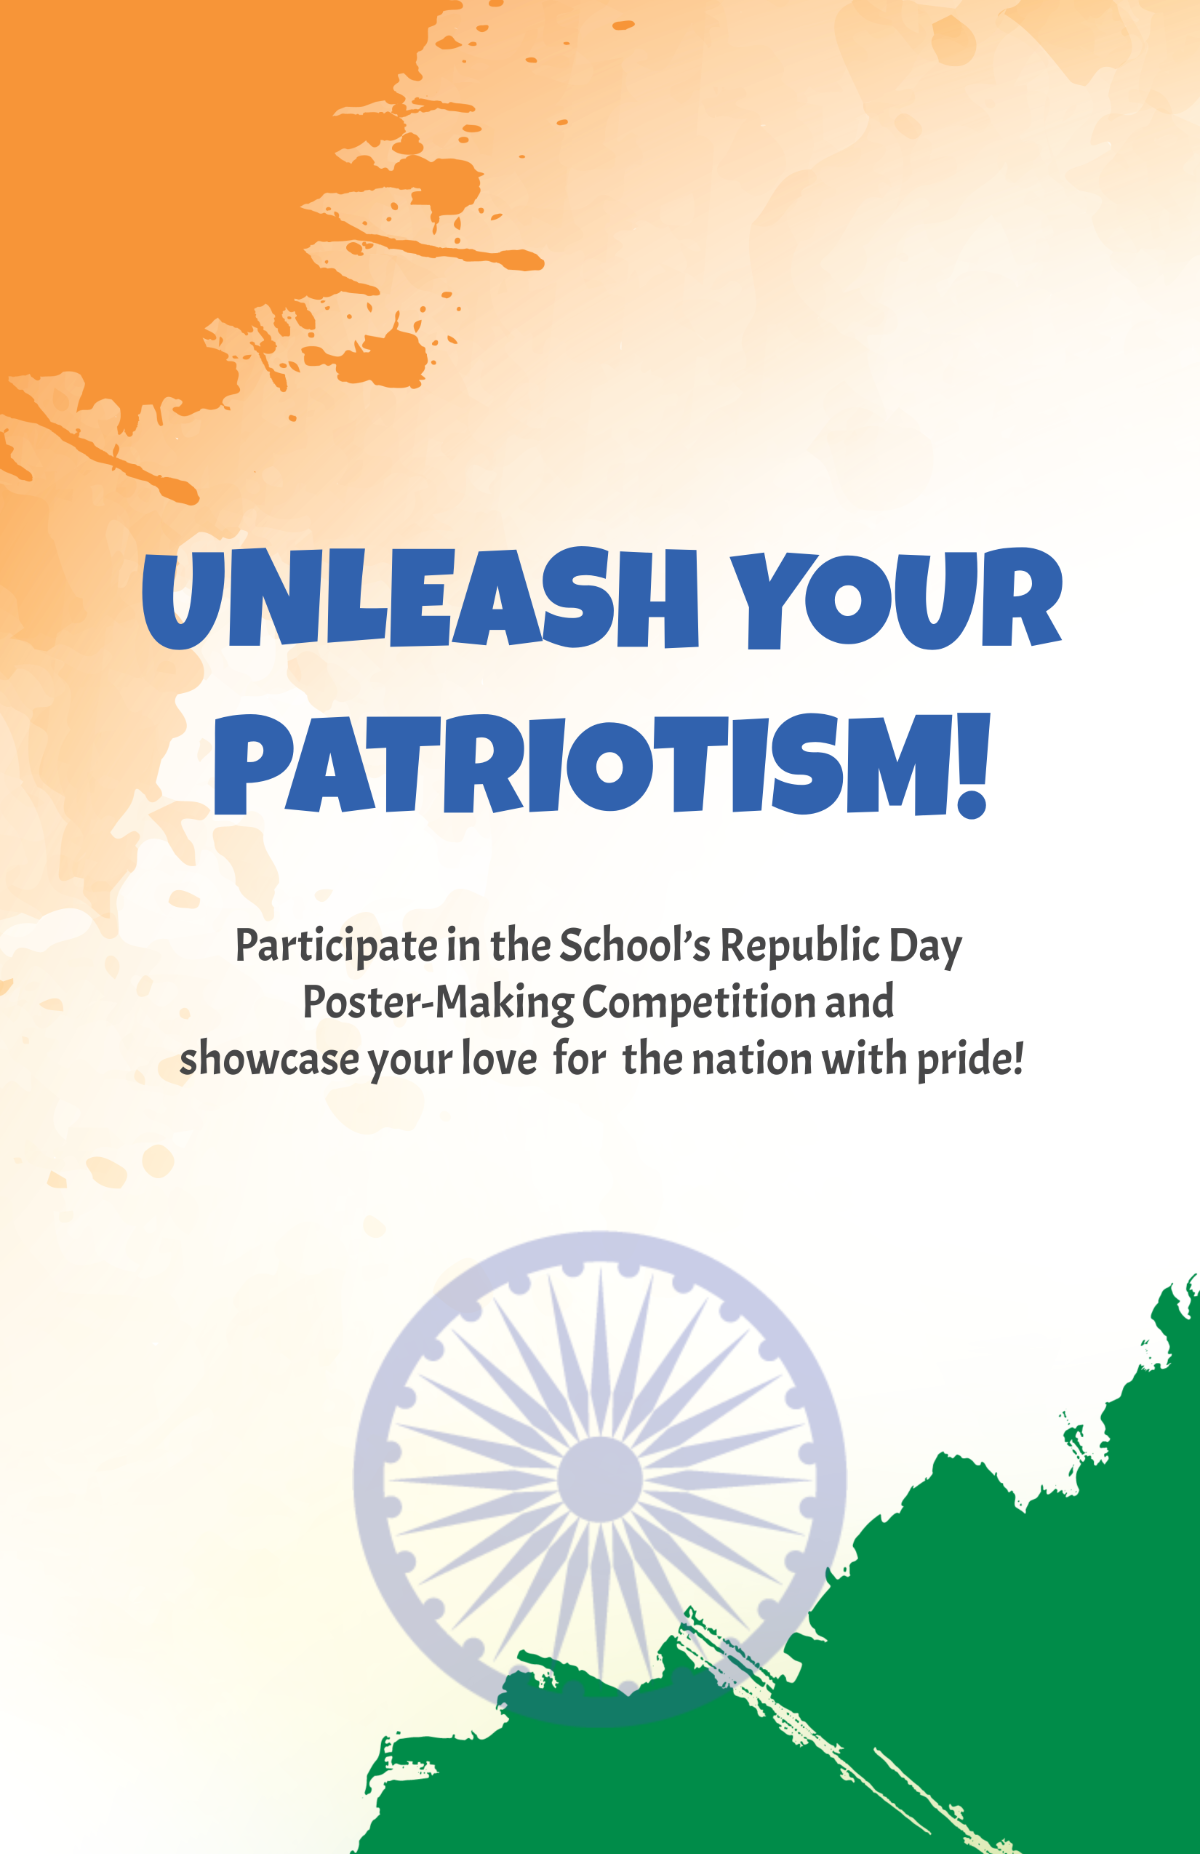 Free Republic Day Poster for School Template